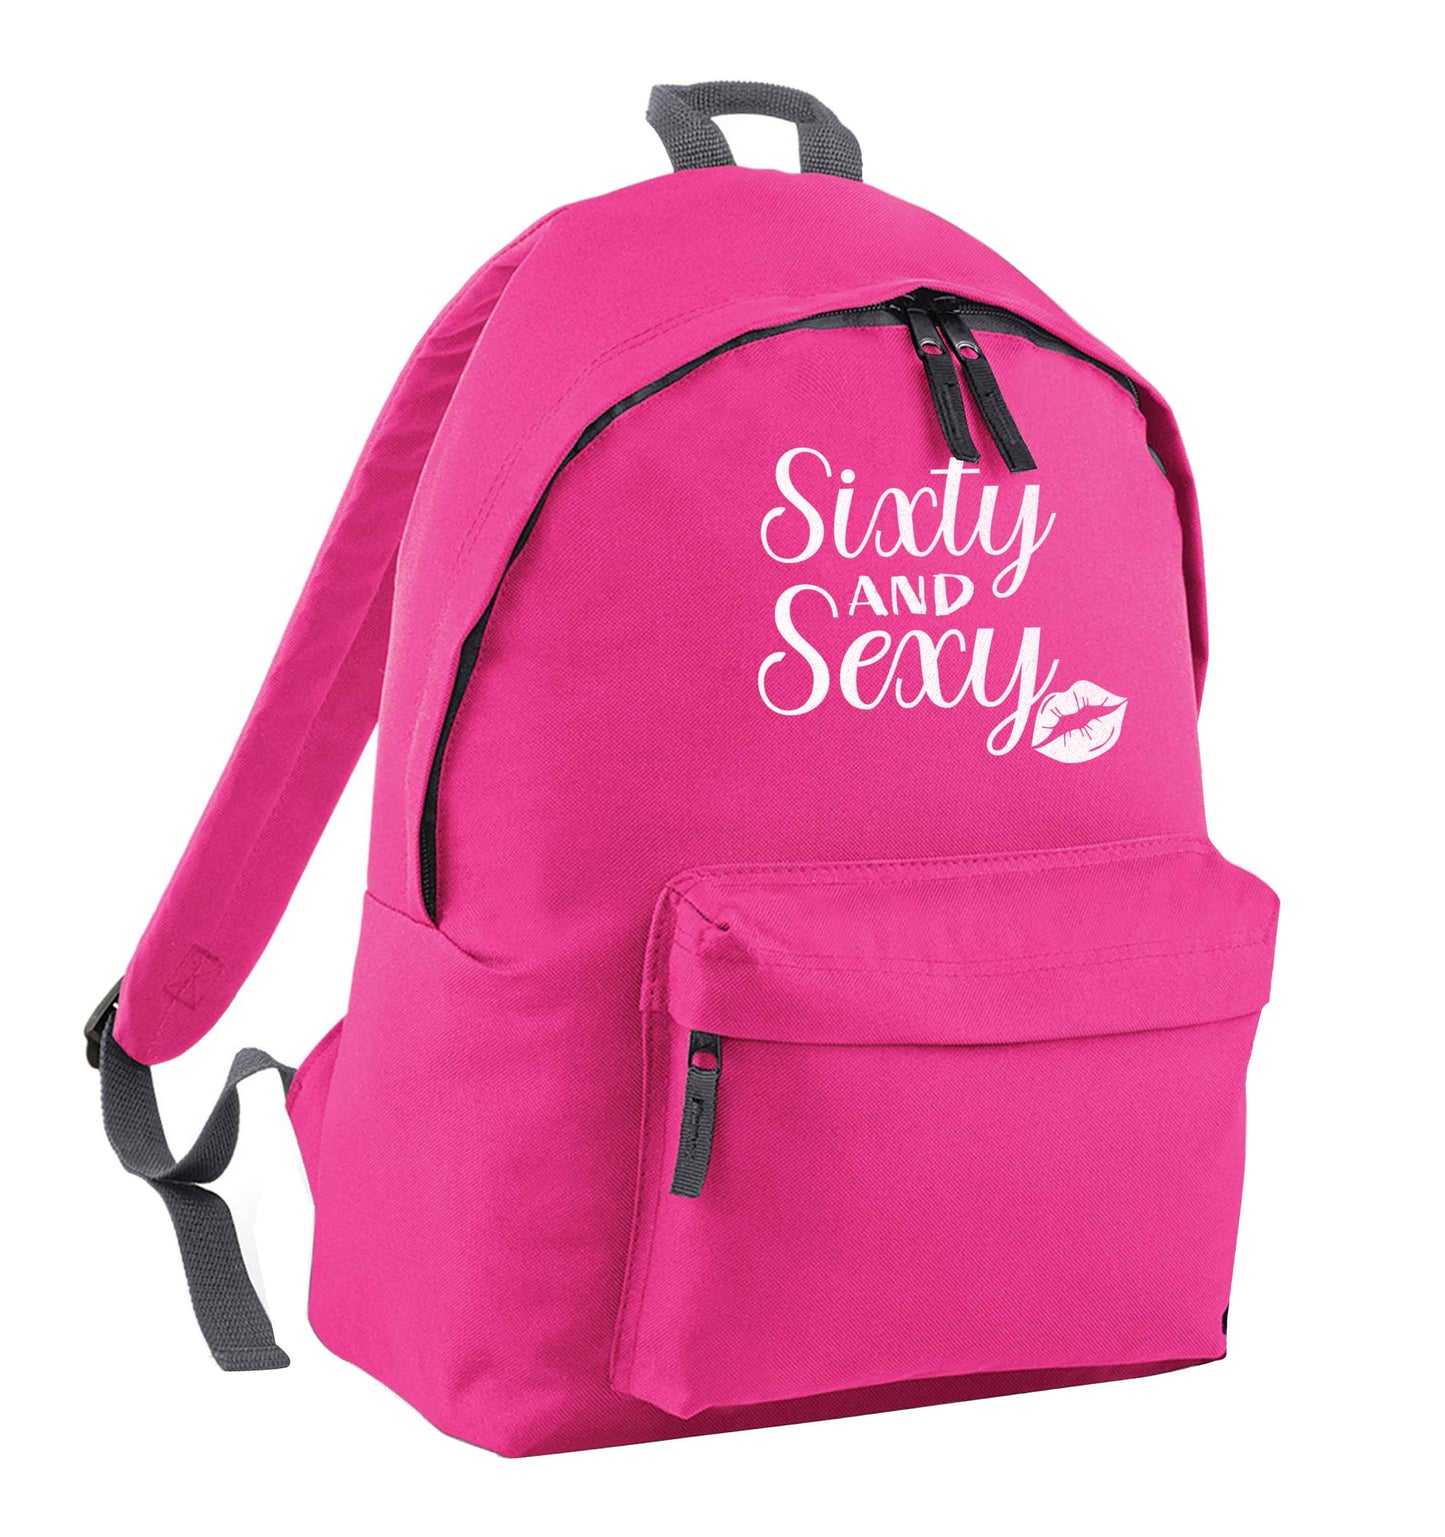 Sixty and sexy pink adults backpack